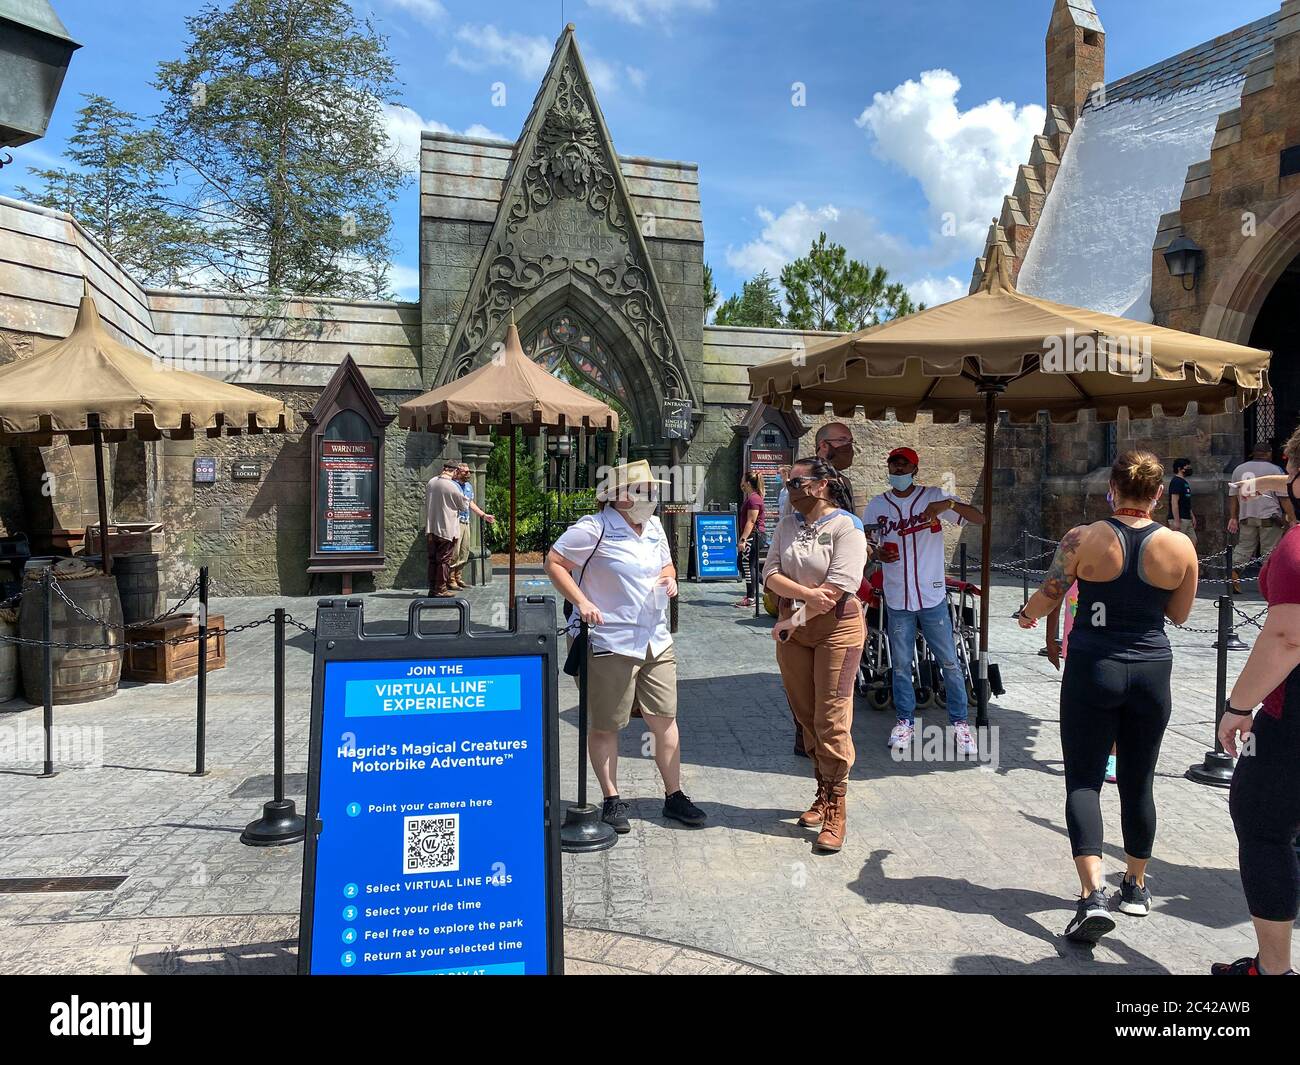 Orlando, FL/USA-6/13/20: The entrance to the Hagrid's Magical Creatures Ride at Wizarding World of Harry Potter with people wearing face masks. Stock Photo